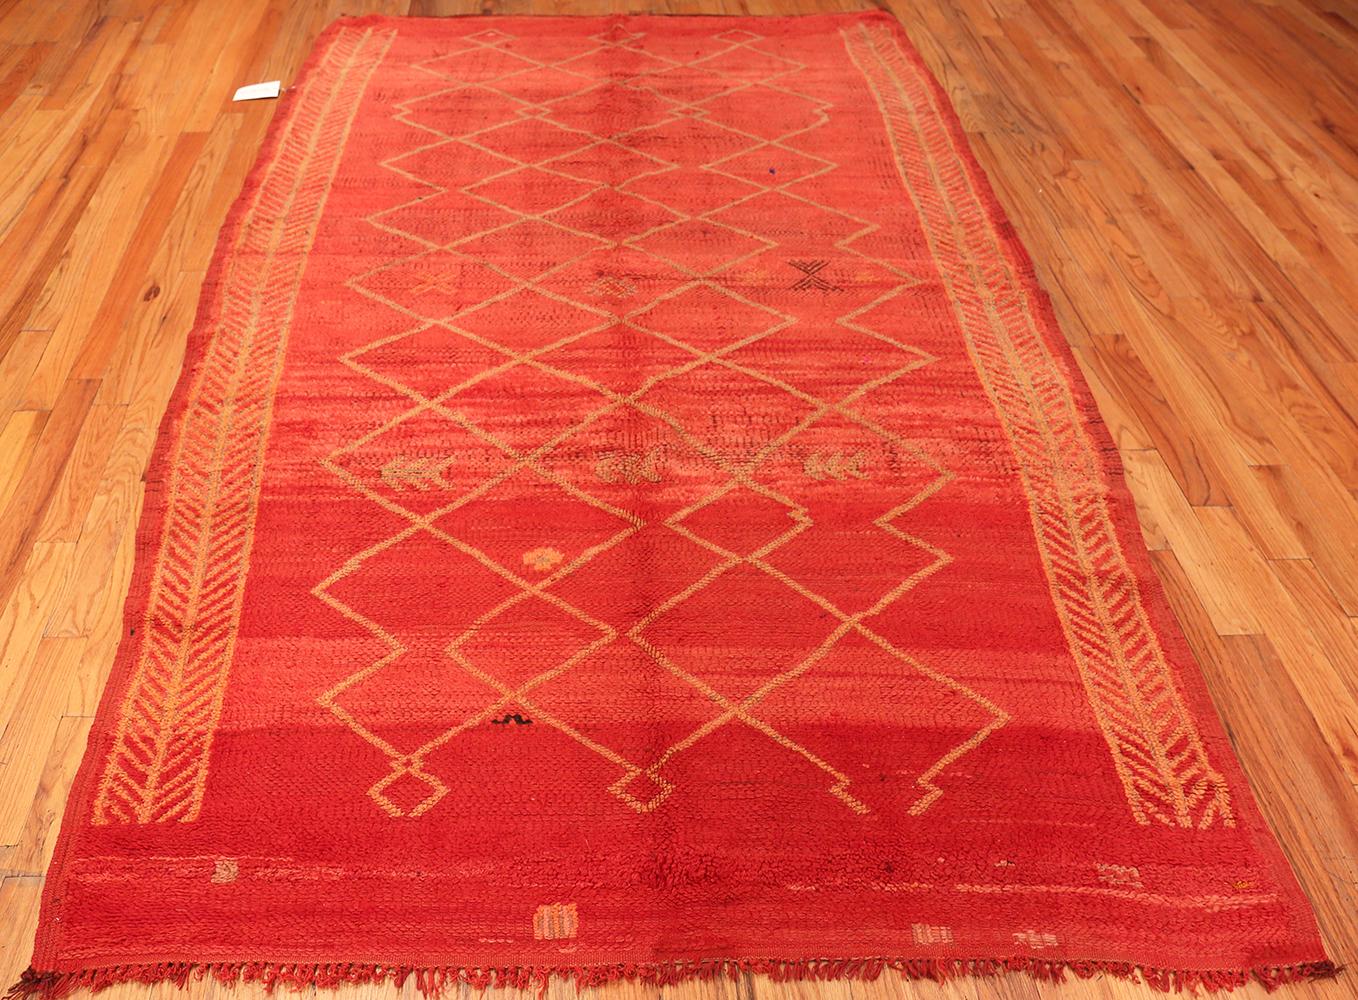 Wool Vintage Moroccan Red Rug. Size: 5 ft. 6 in x 11 ft. 8 in